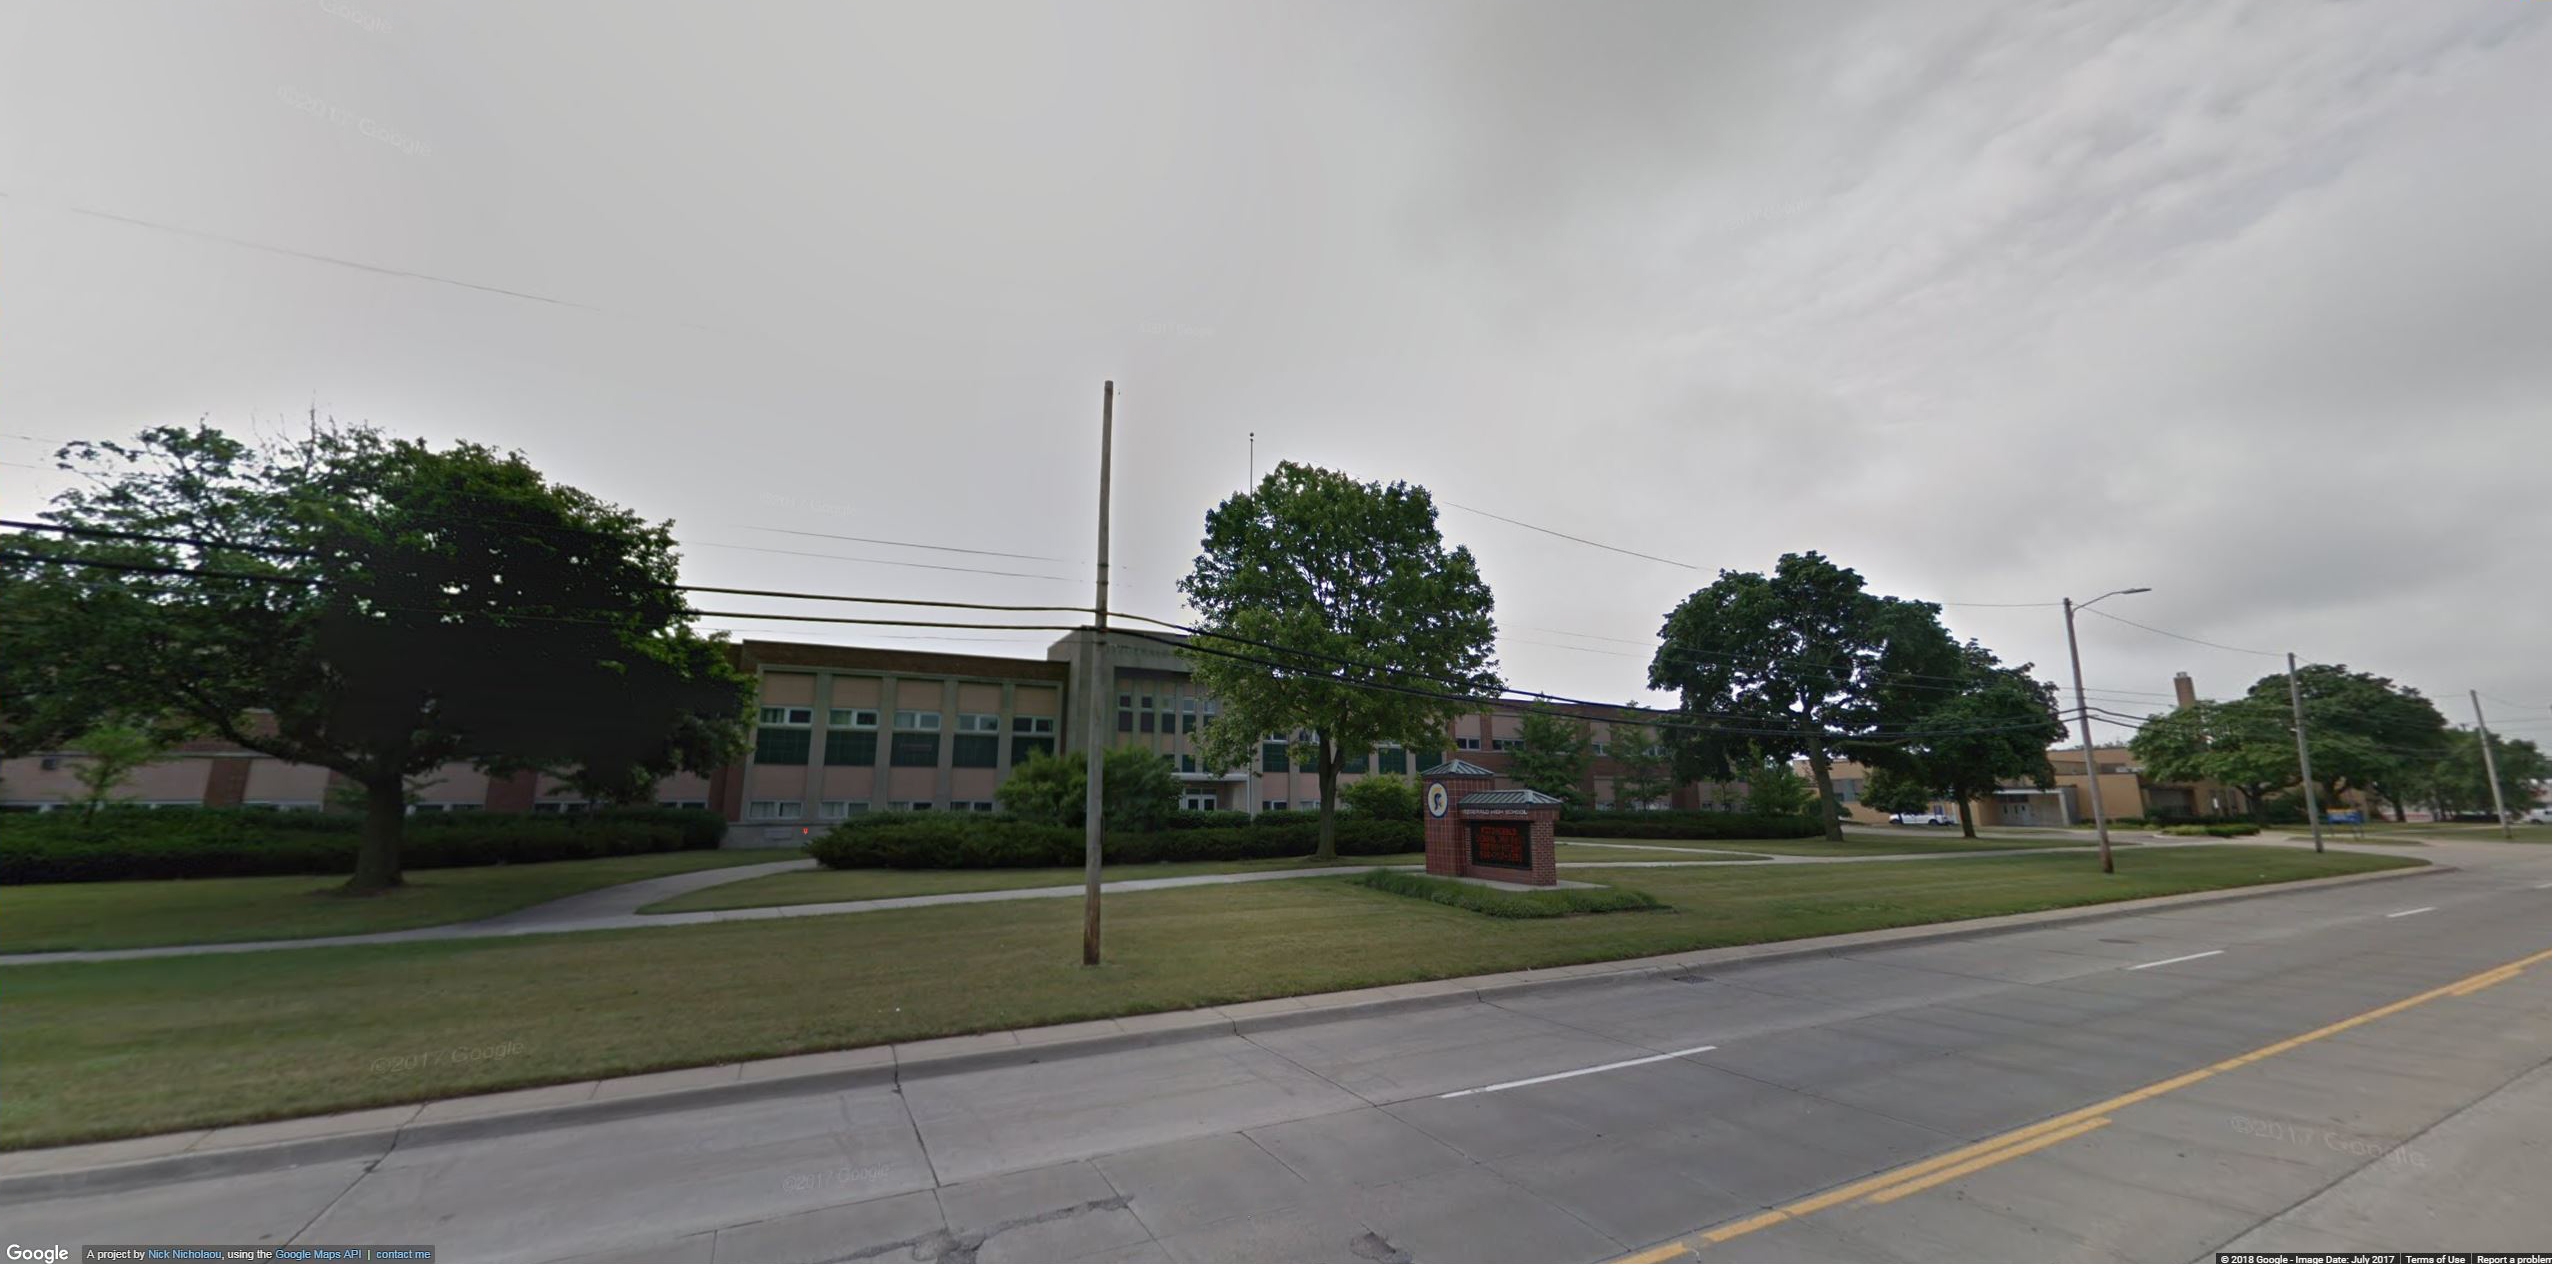 PHOTO: Fitzgerald High School in Warren, Mich., is pictured in this Google Maps image.